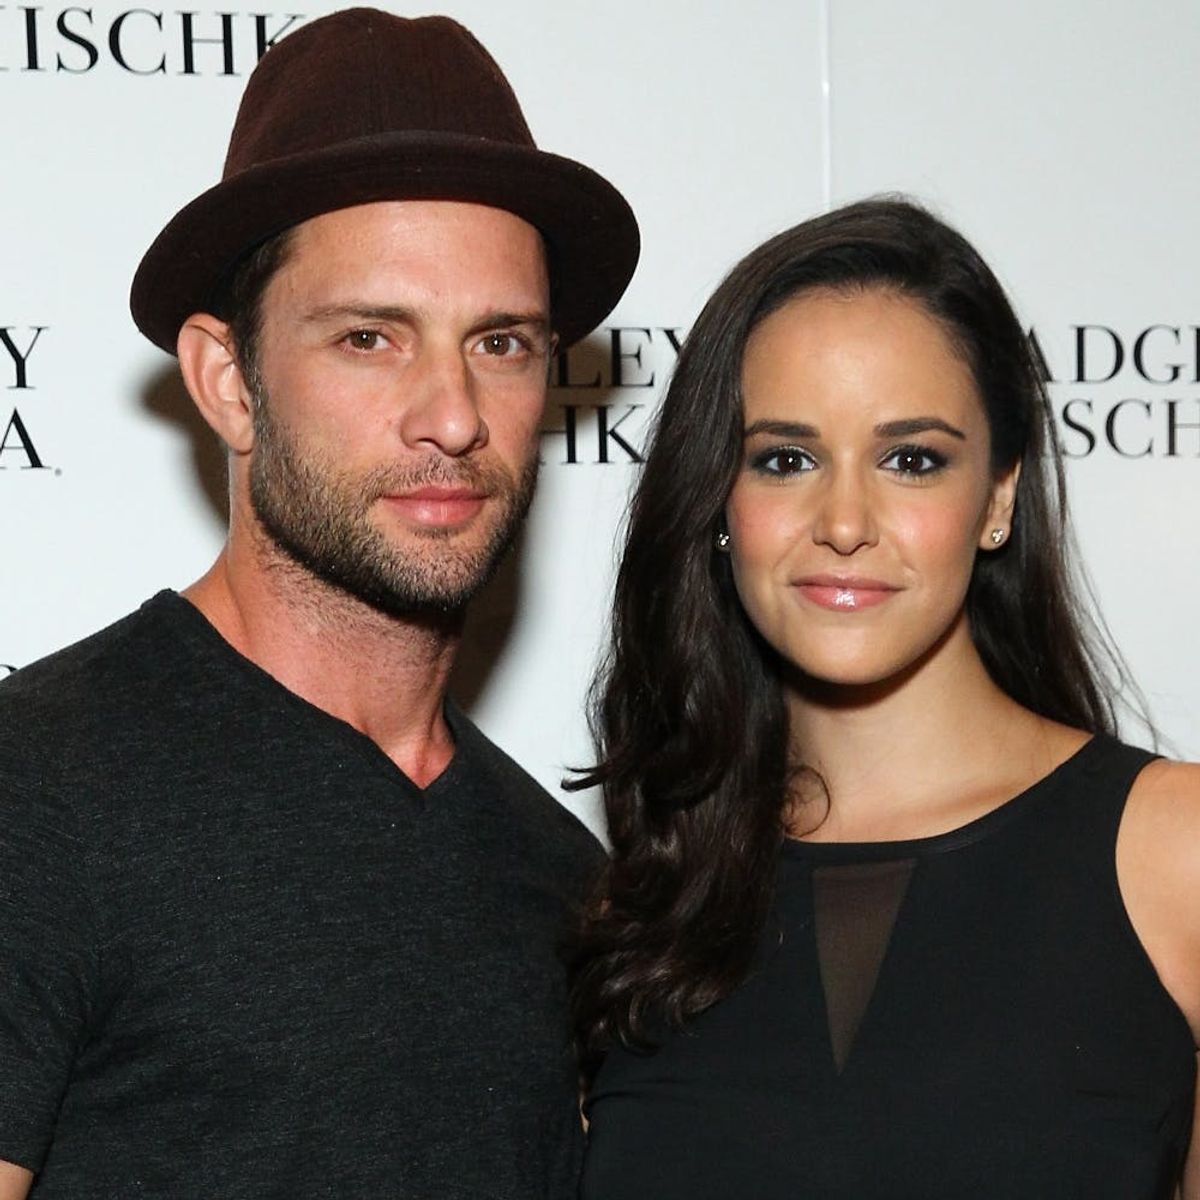 Find Out What Brooklyn Nine-Nine Star Melissa Fumero Named Her New Baby Boy